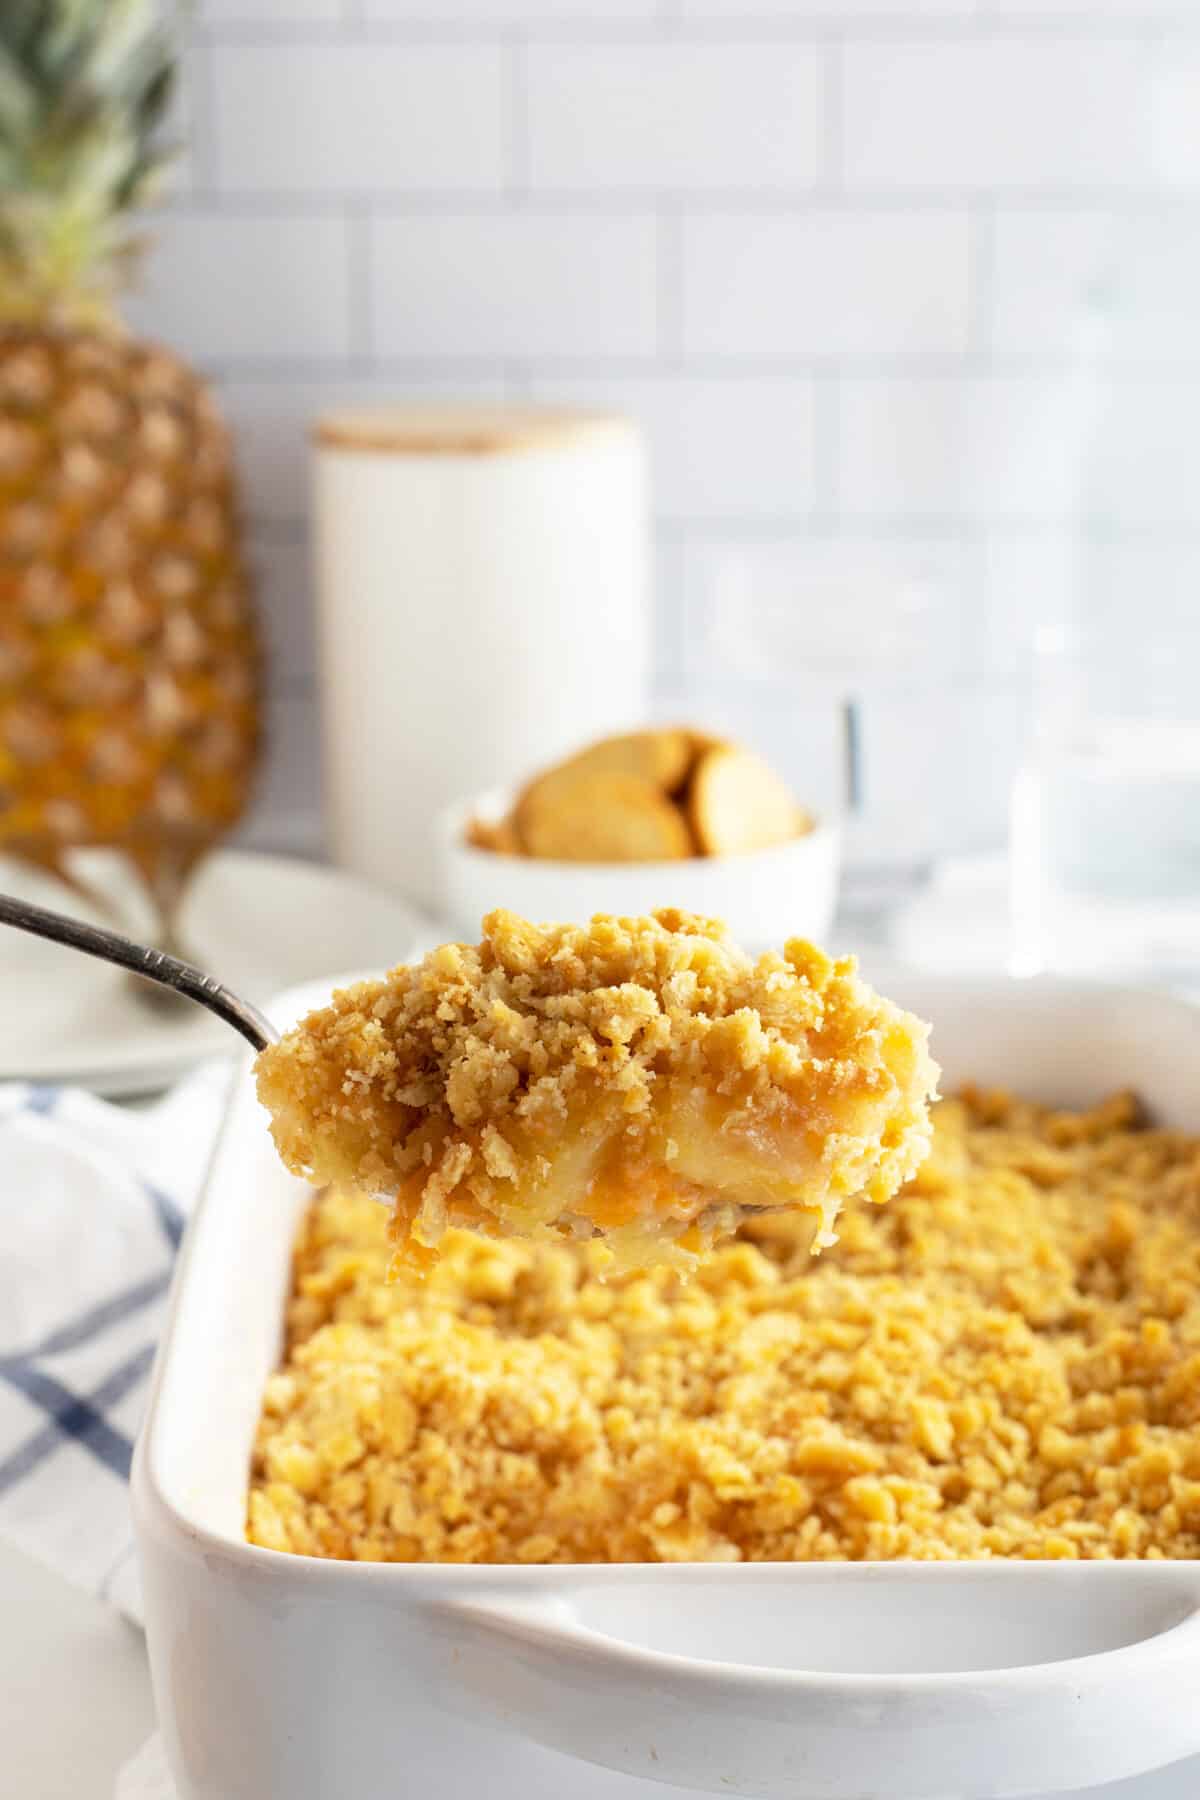 Pineapple casserole on a large spoon lifed out of the casserole dish